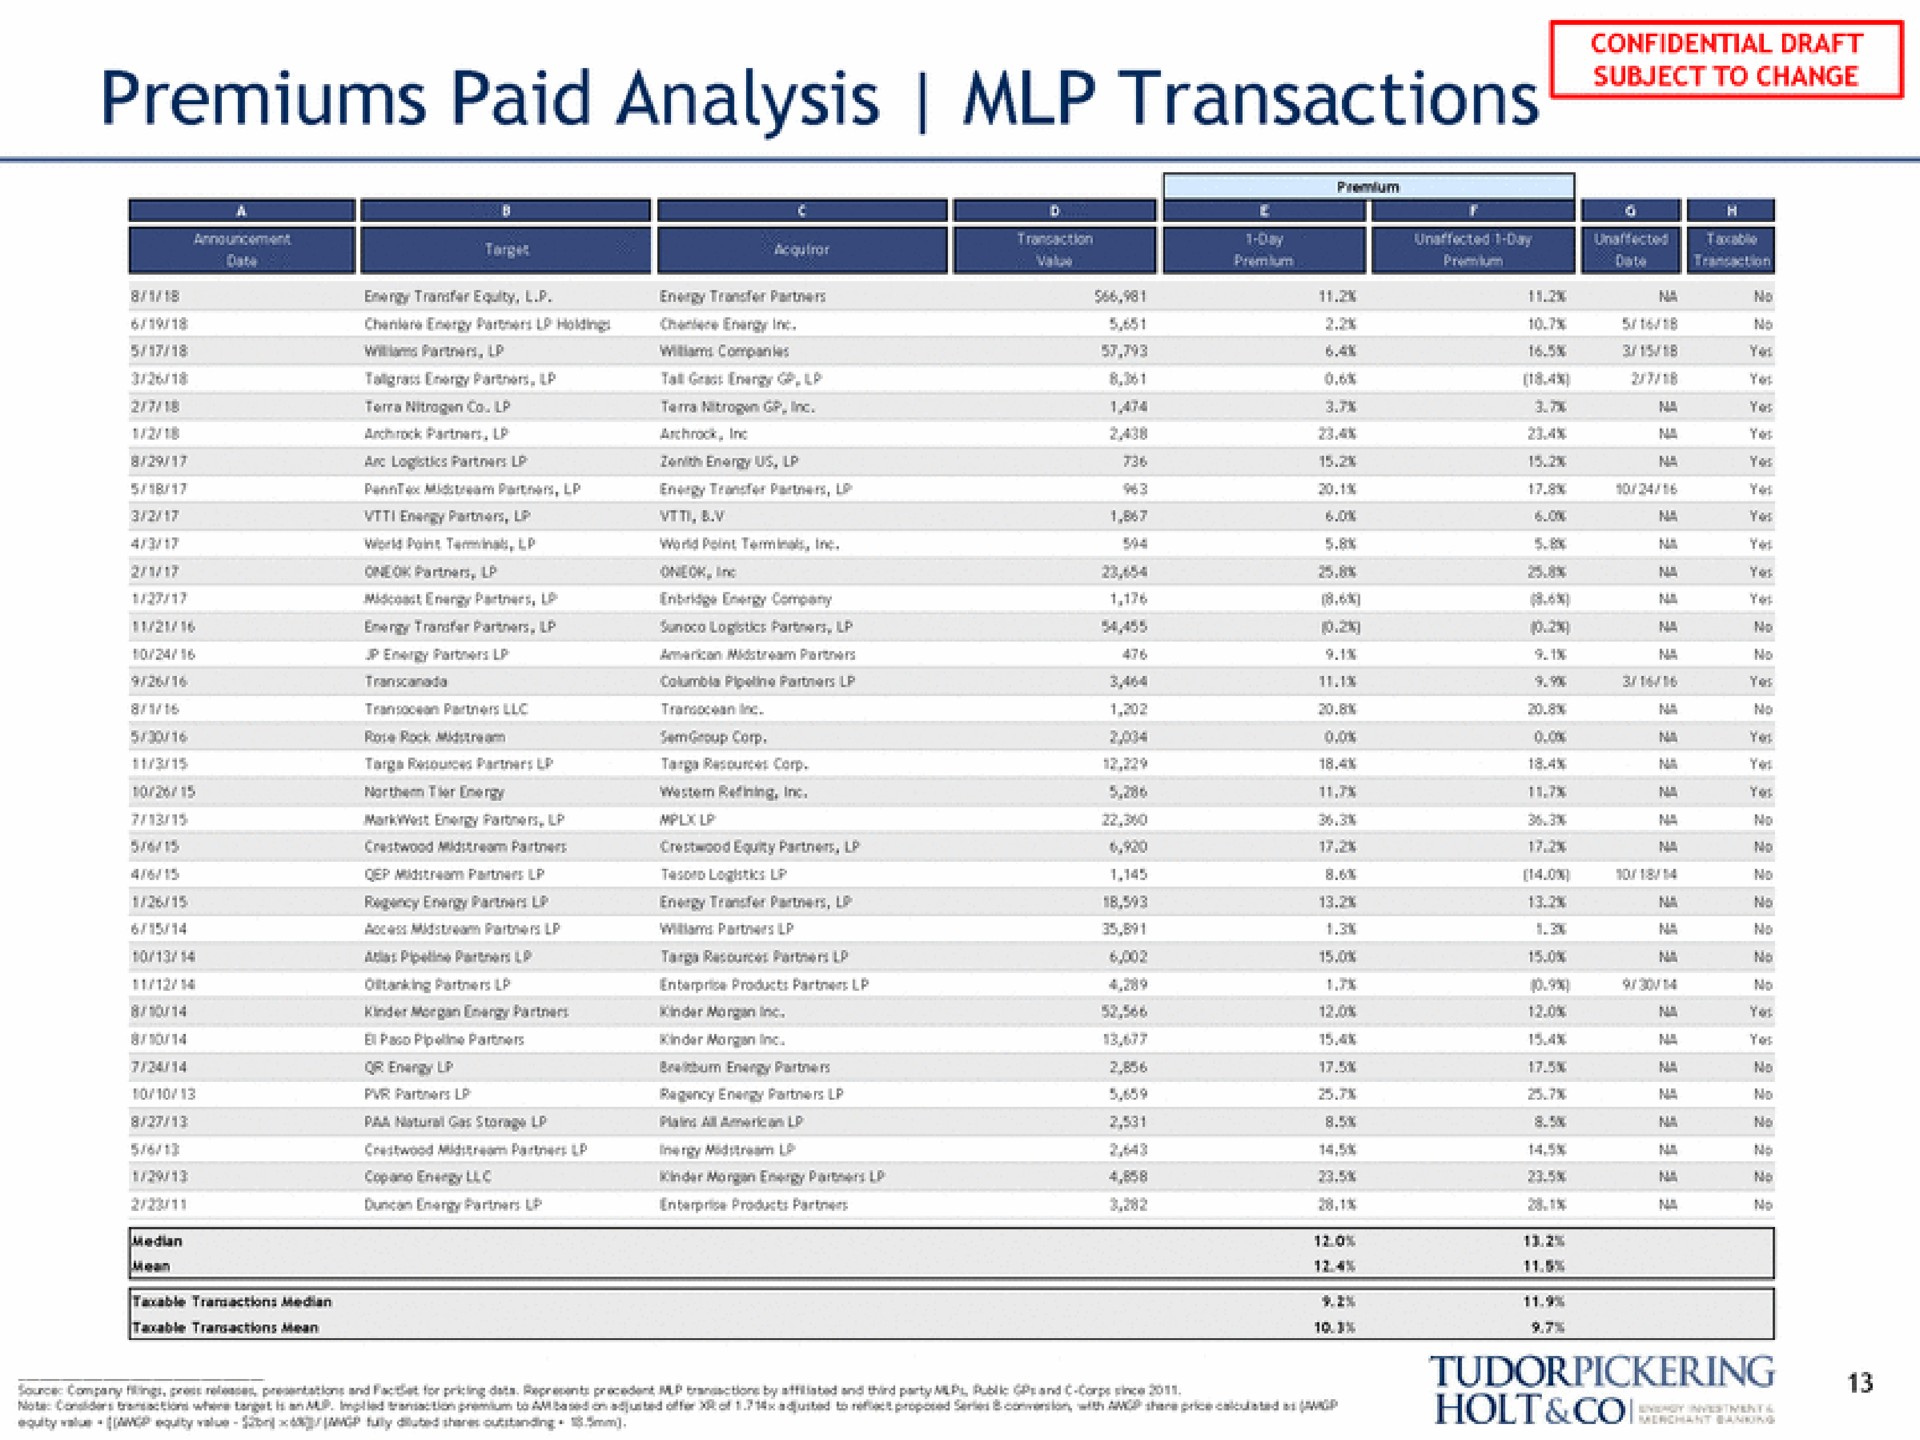 premiums paid analysis transactions | Tudor, Pickering, Holt & Co